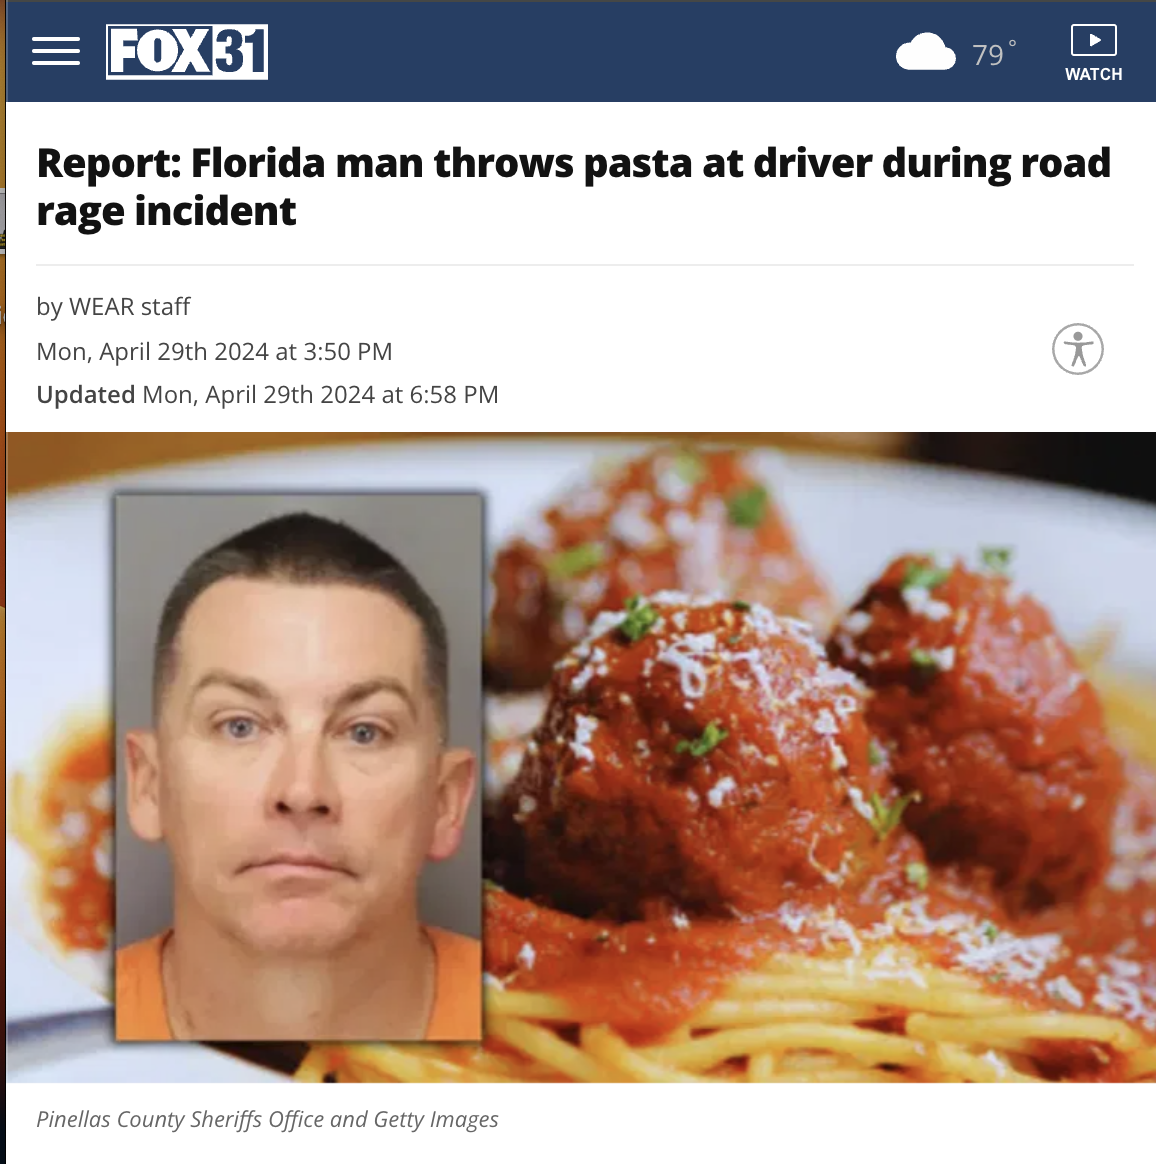 spaghetti and meatballs free - Fox 31 79 Watch Report Florida man throws pasta at driver during road rage incident by Wear staff Mon, April 29th 2024 at Updated Mon, April 29th 2024 at Pinellas County Sheriffs Office and Getty Images